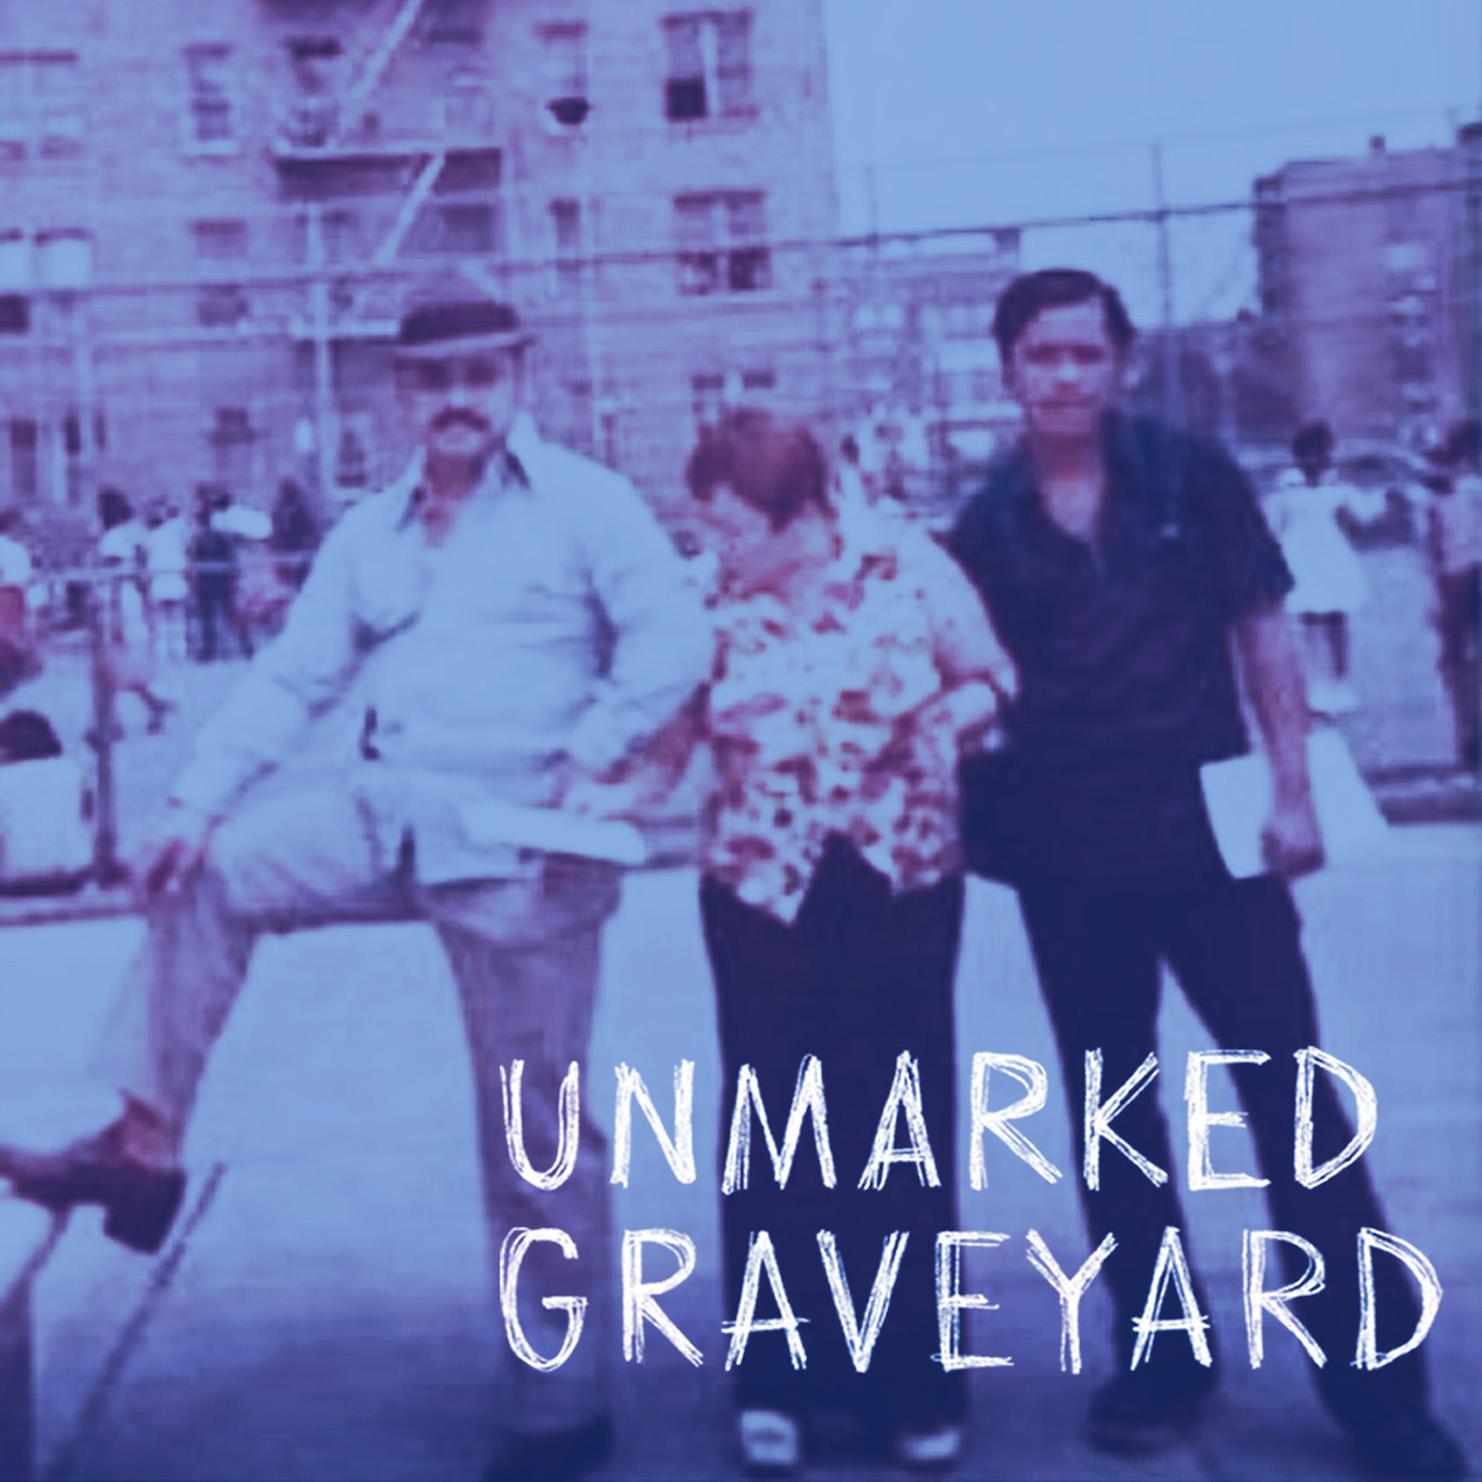 Thumbnail for "The Unmarked Graveyard: Cesar Irizarry".